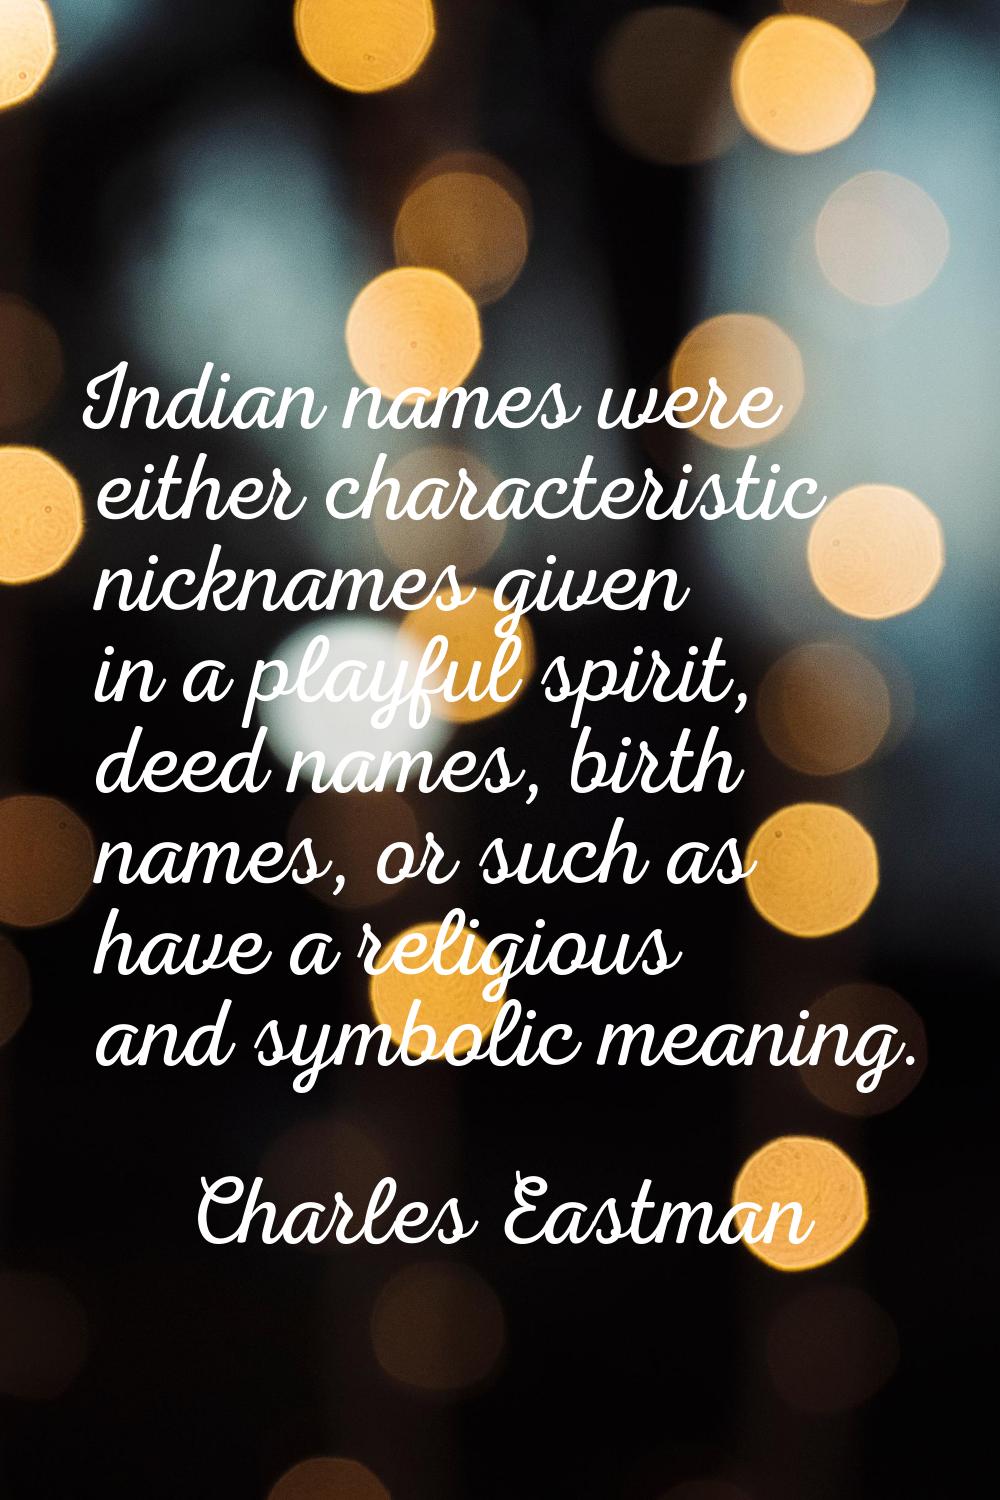 Indian names were either characteristic nicknames given in a playful spirit, deed names, birth name